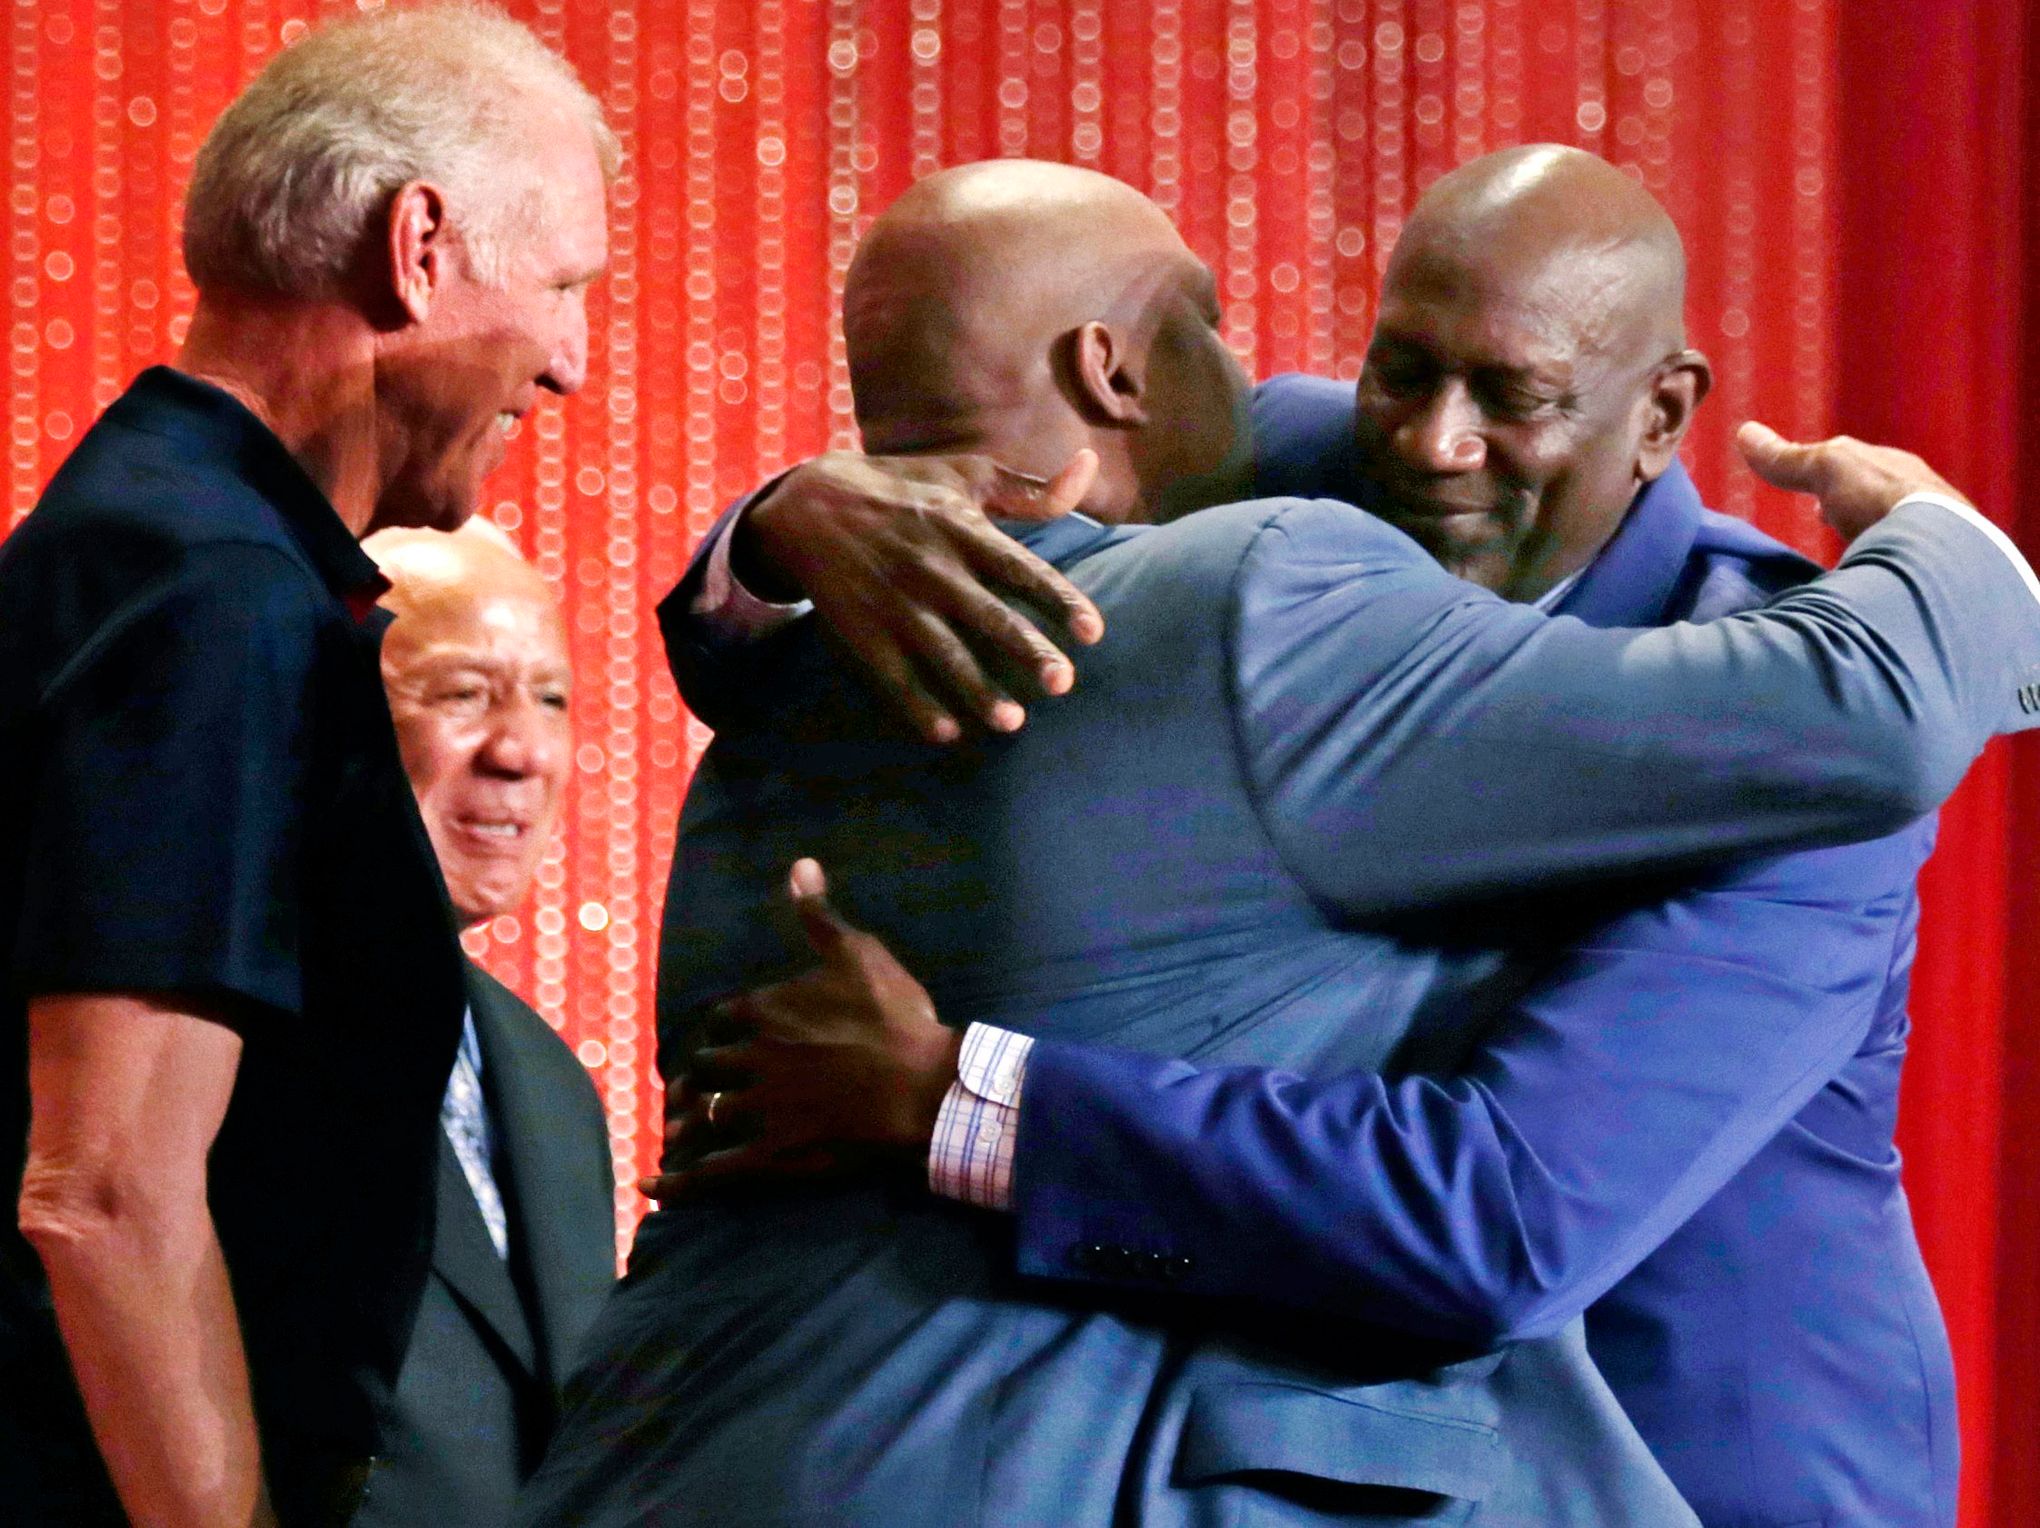 Spencer Haywood misses cut for Naismith Hall of Fame